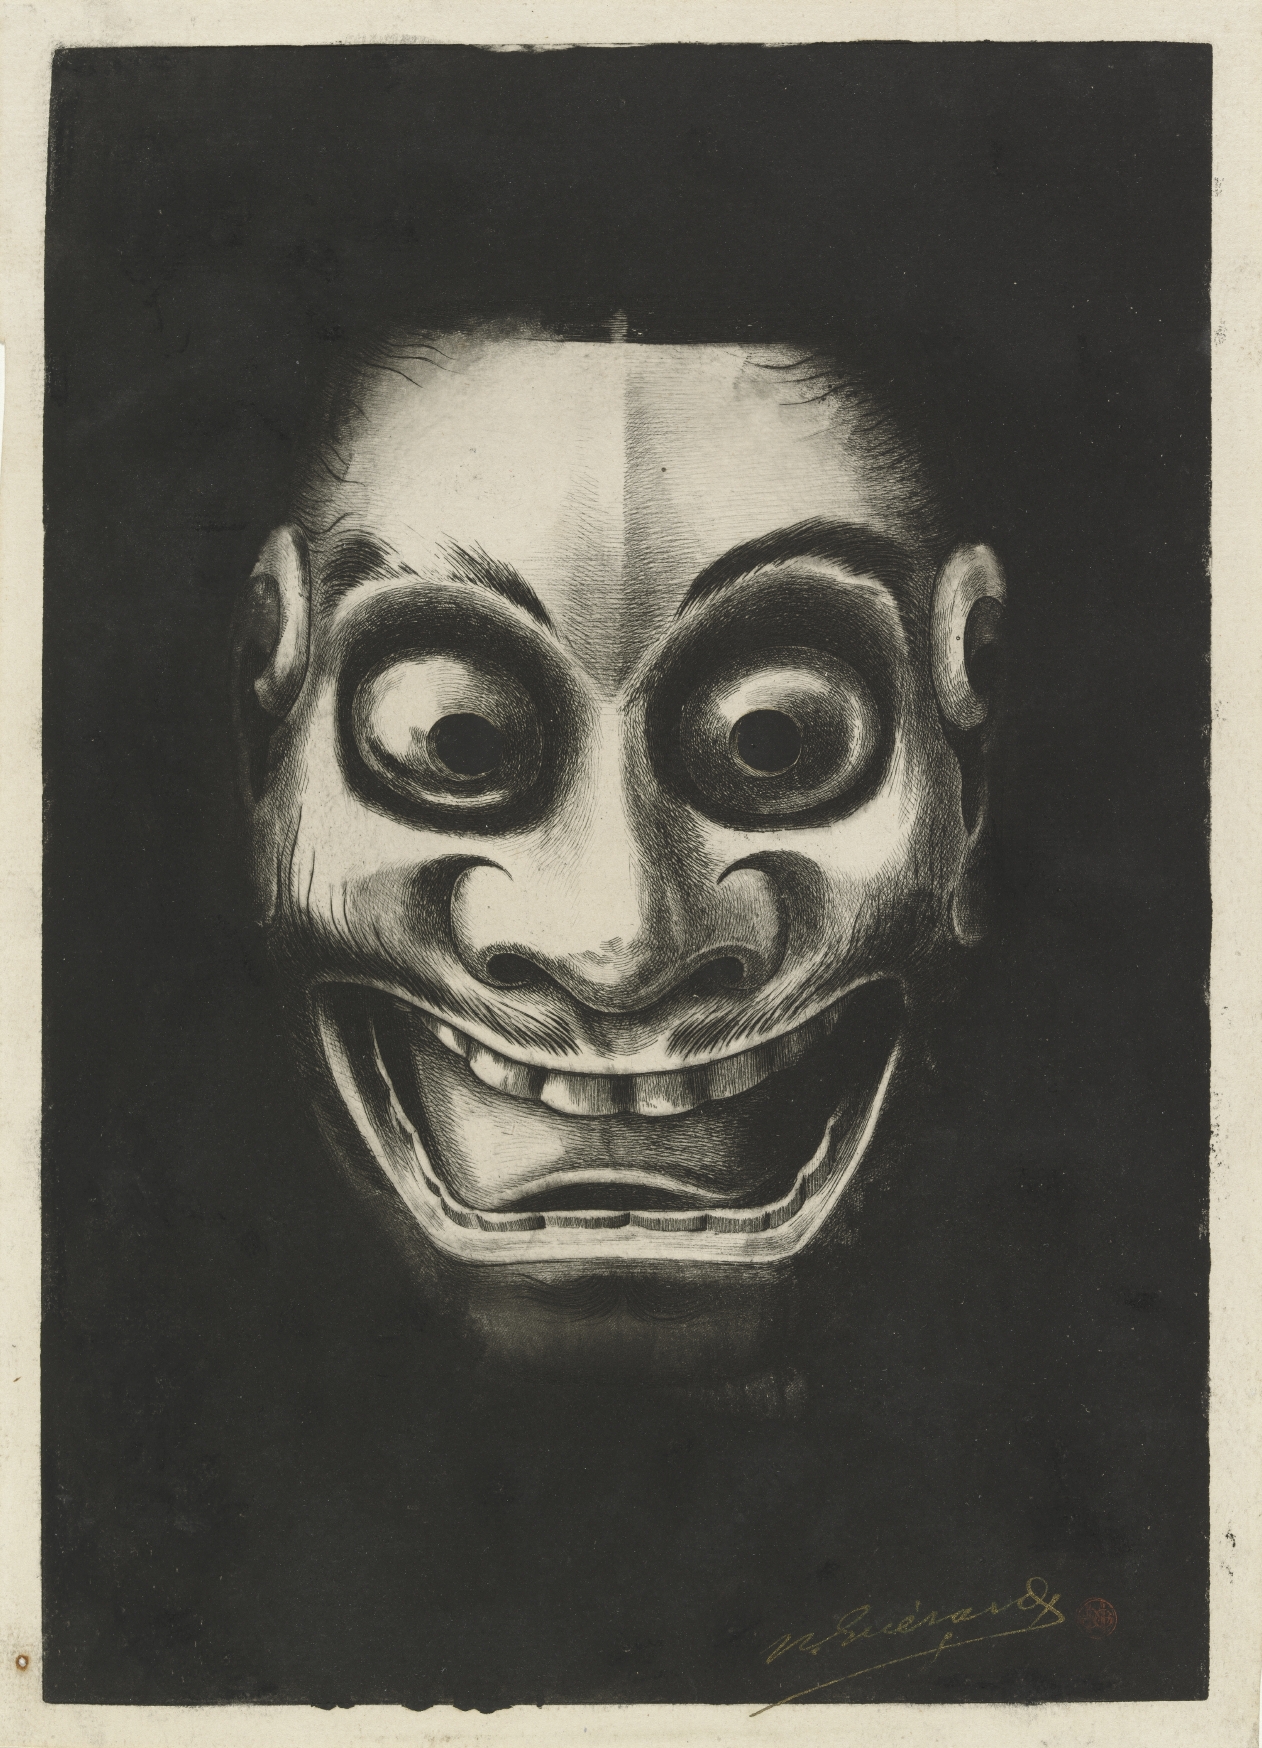 Antique Theatre Mask from Lacquered Wood by Henri Guérard - 1882 - 32.4 x 23.4 cm Van Gogh Museum